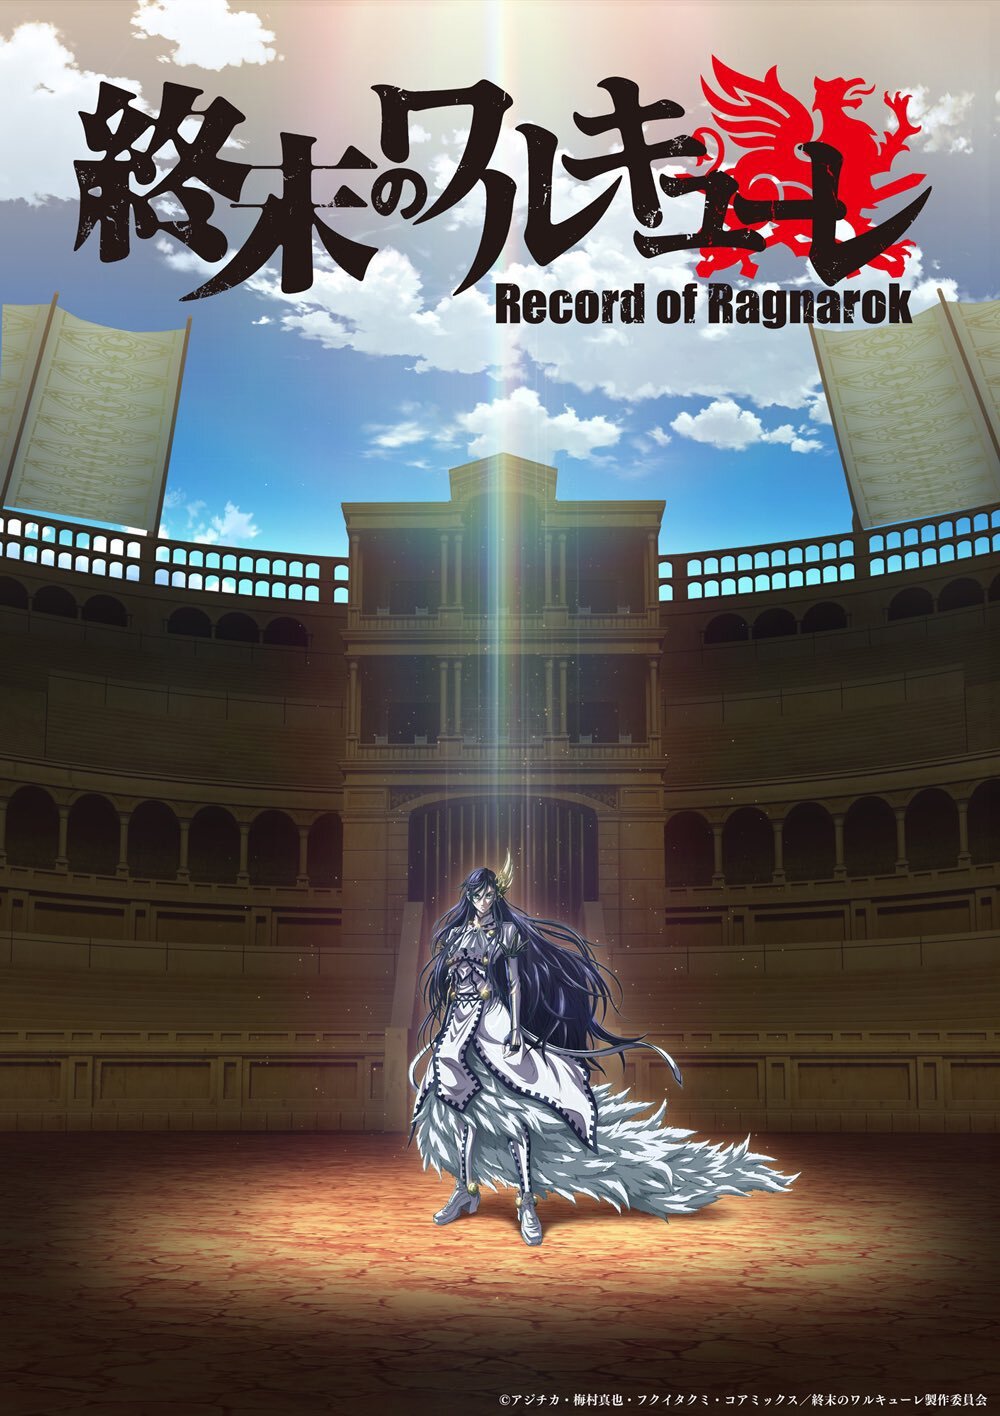 Record of Ragnarok is Listed for 1 Cour!